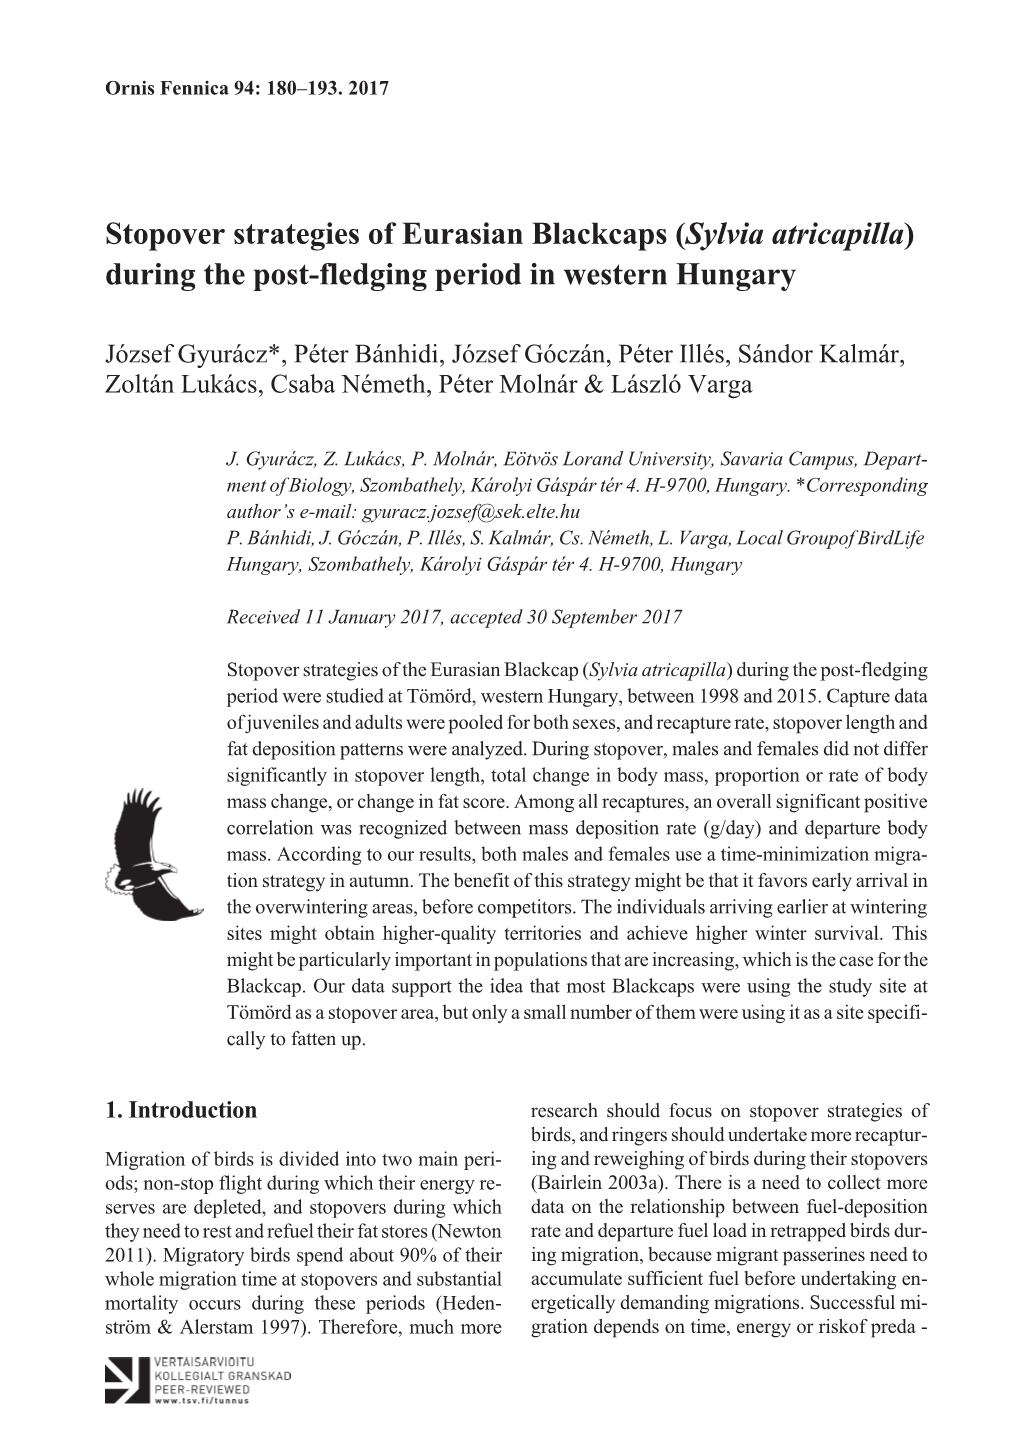 Stopover Strategies of Eurasian Blackcaps (Sylvia Atricapilla) During the Post-Fledging Period in Western Hungary